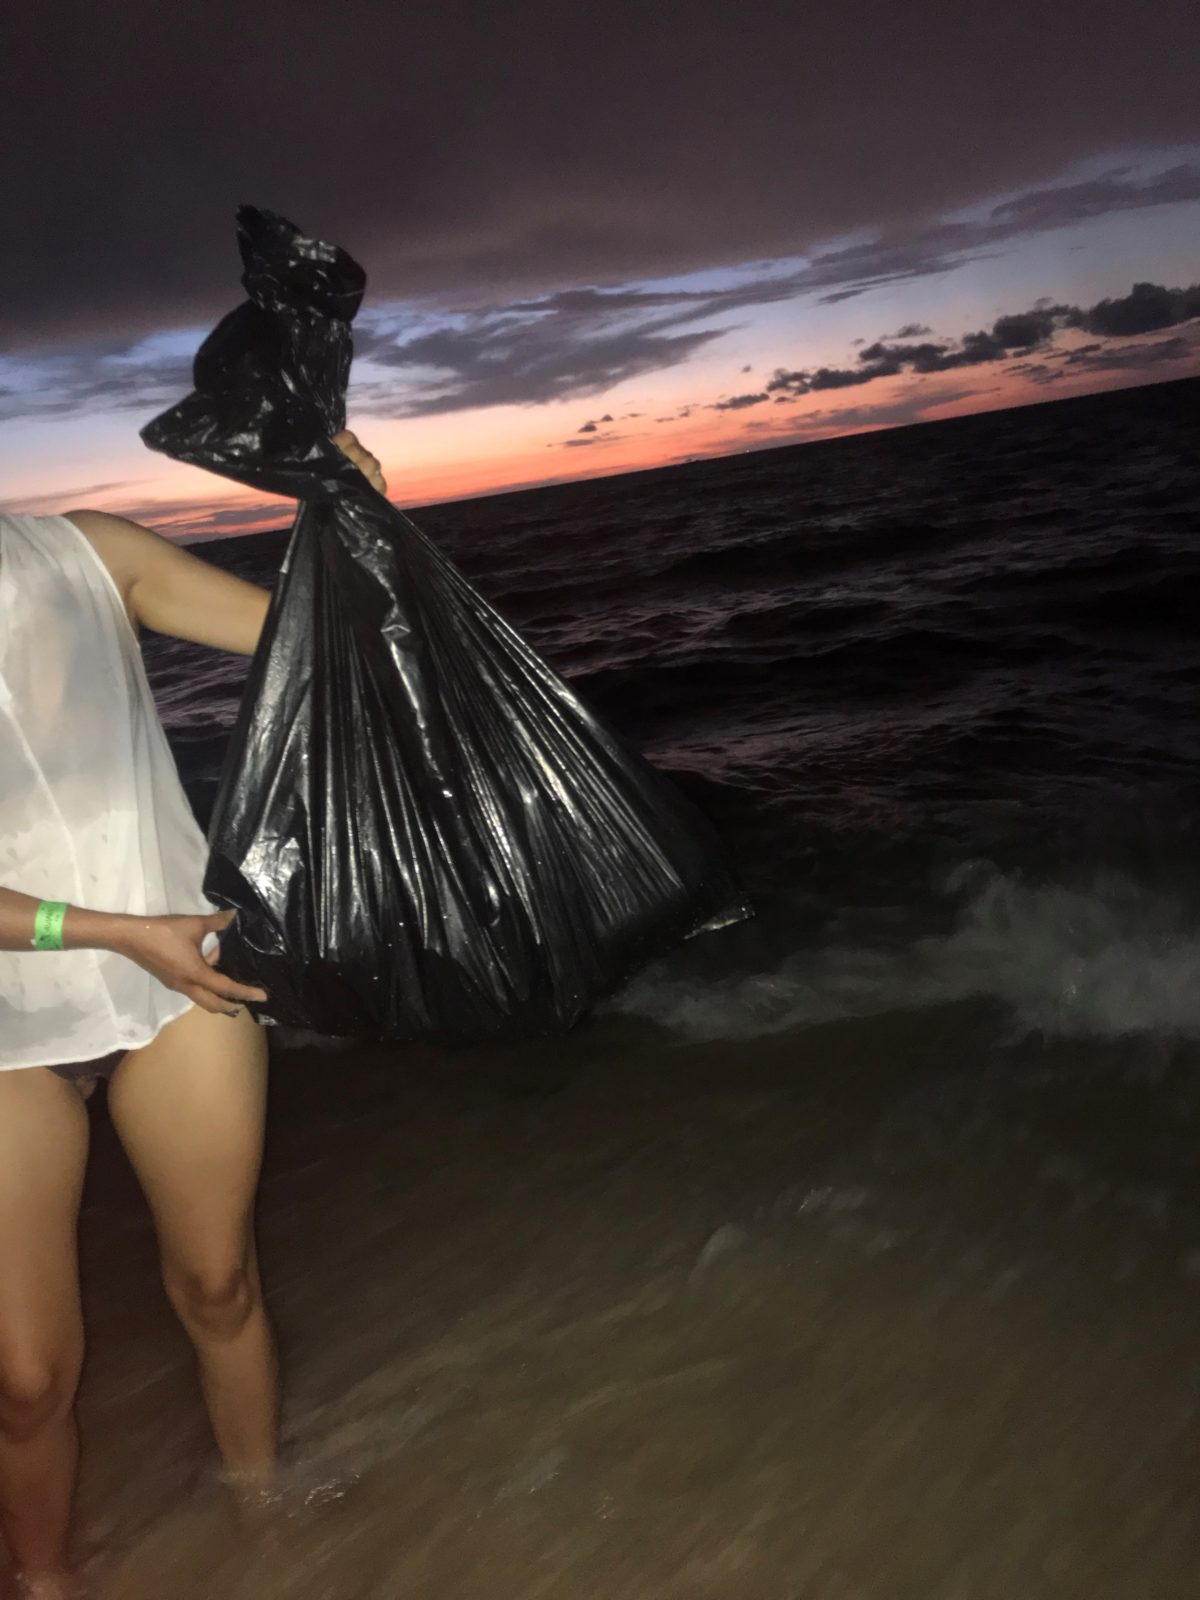 This is 30 minutes of collecting small plastics on Baru beach